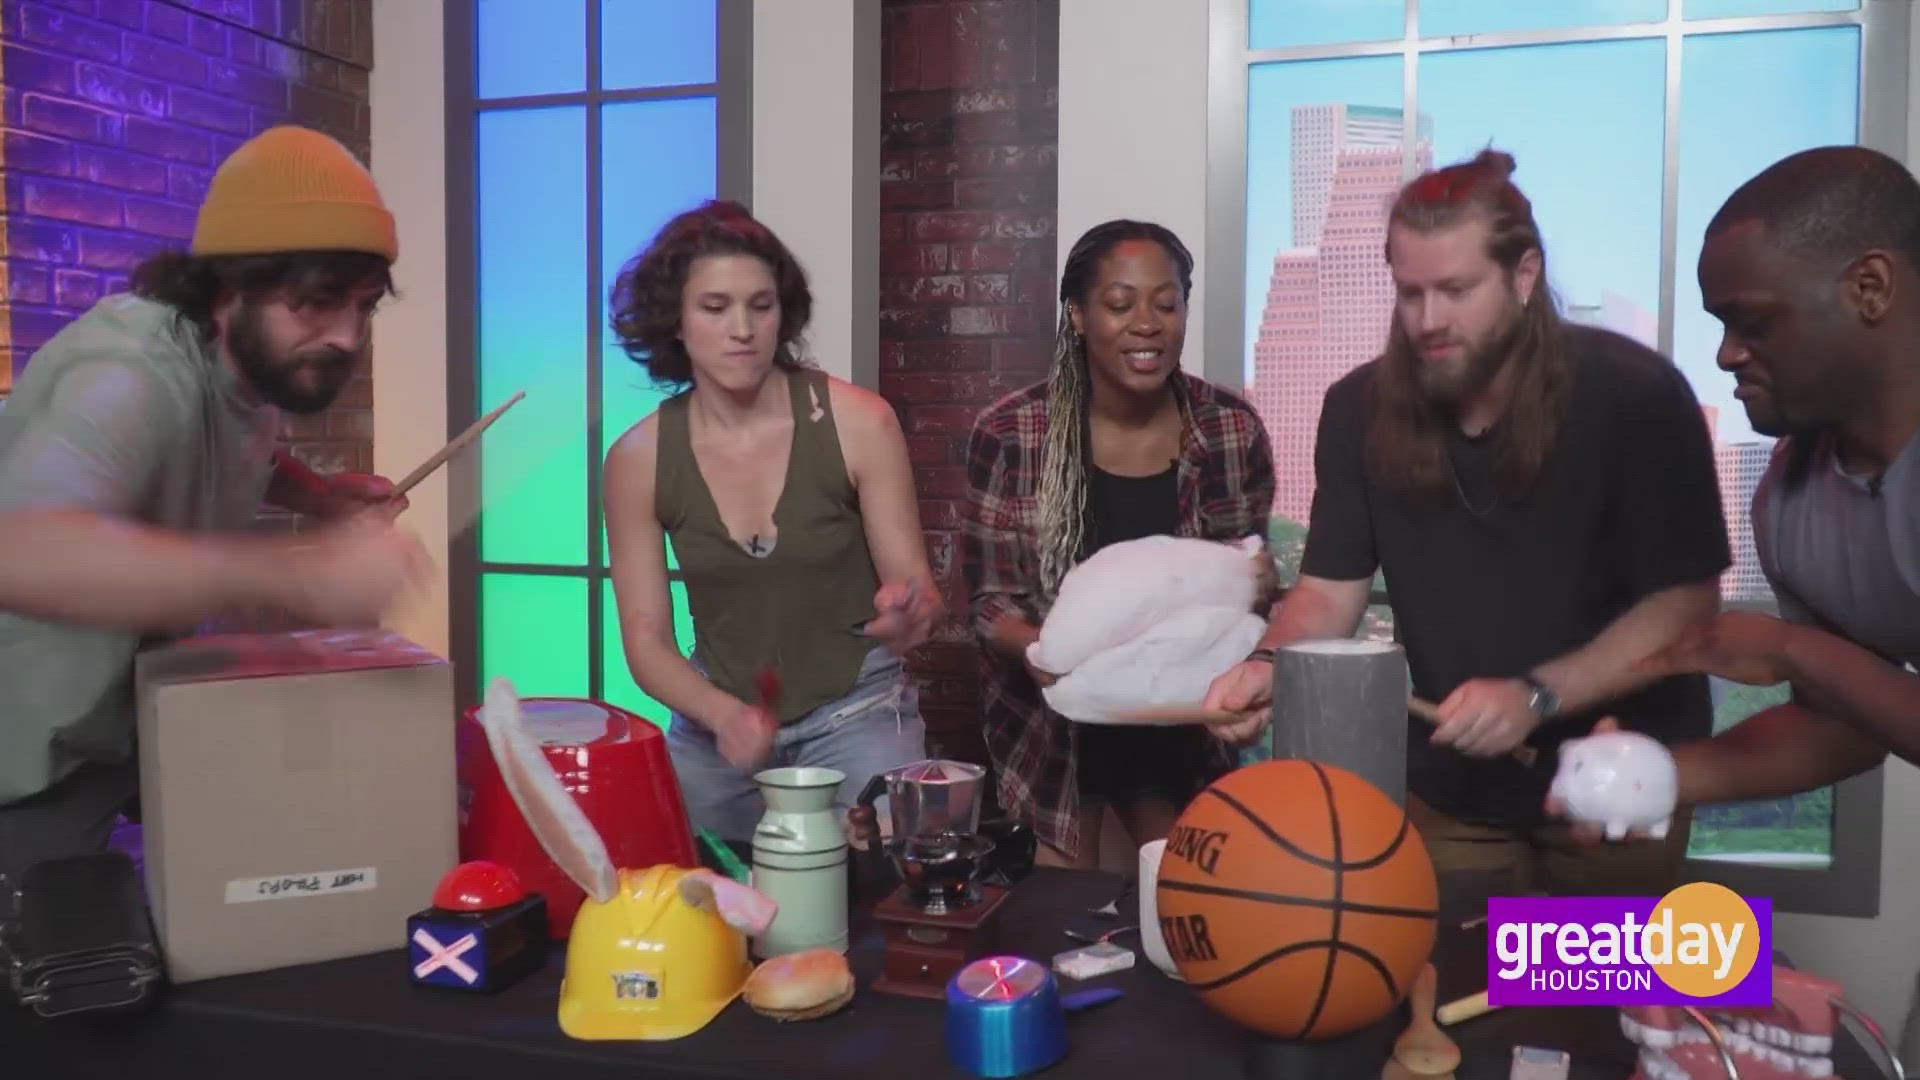 STOMP is an explosive percussion making colorful noises with everyday objects. A few STOMP members join us in studio for an impromptu performance.